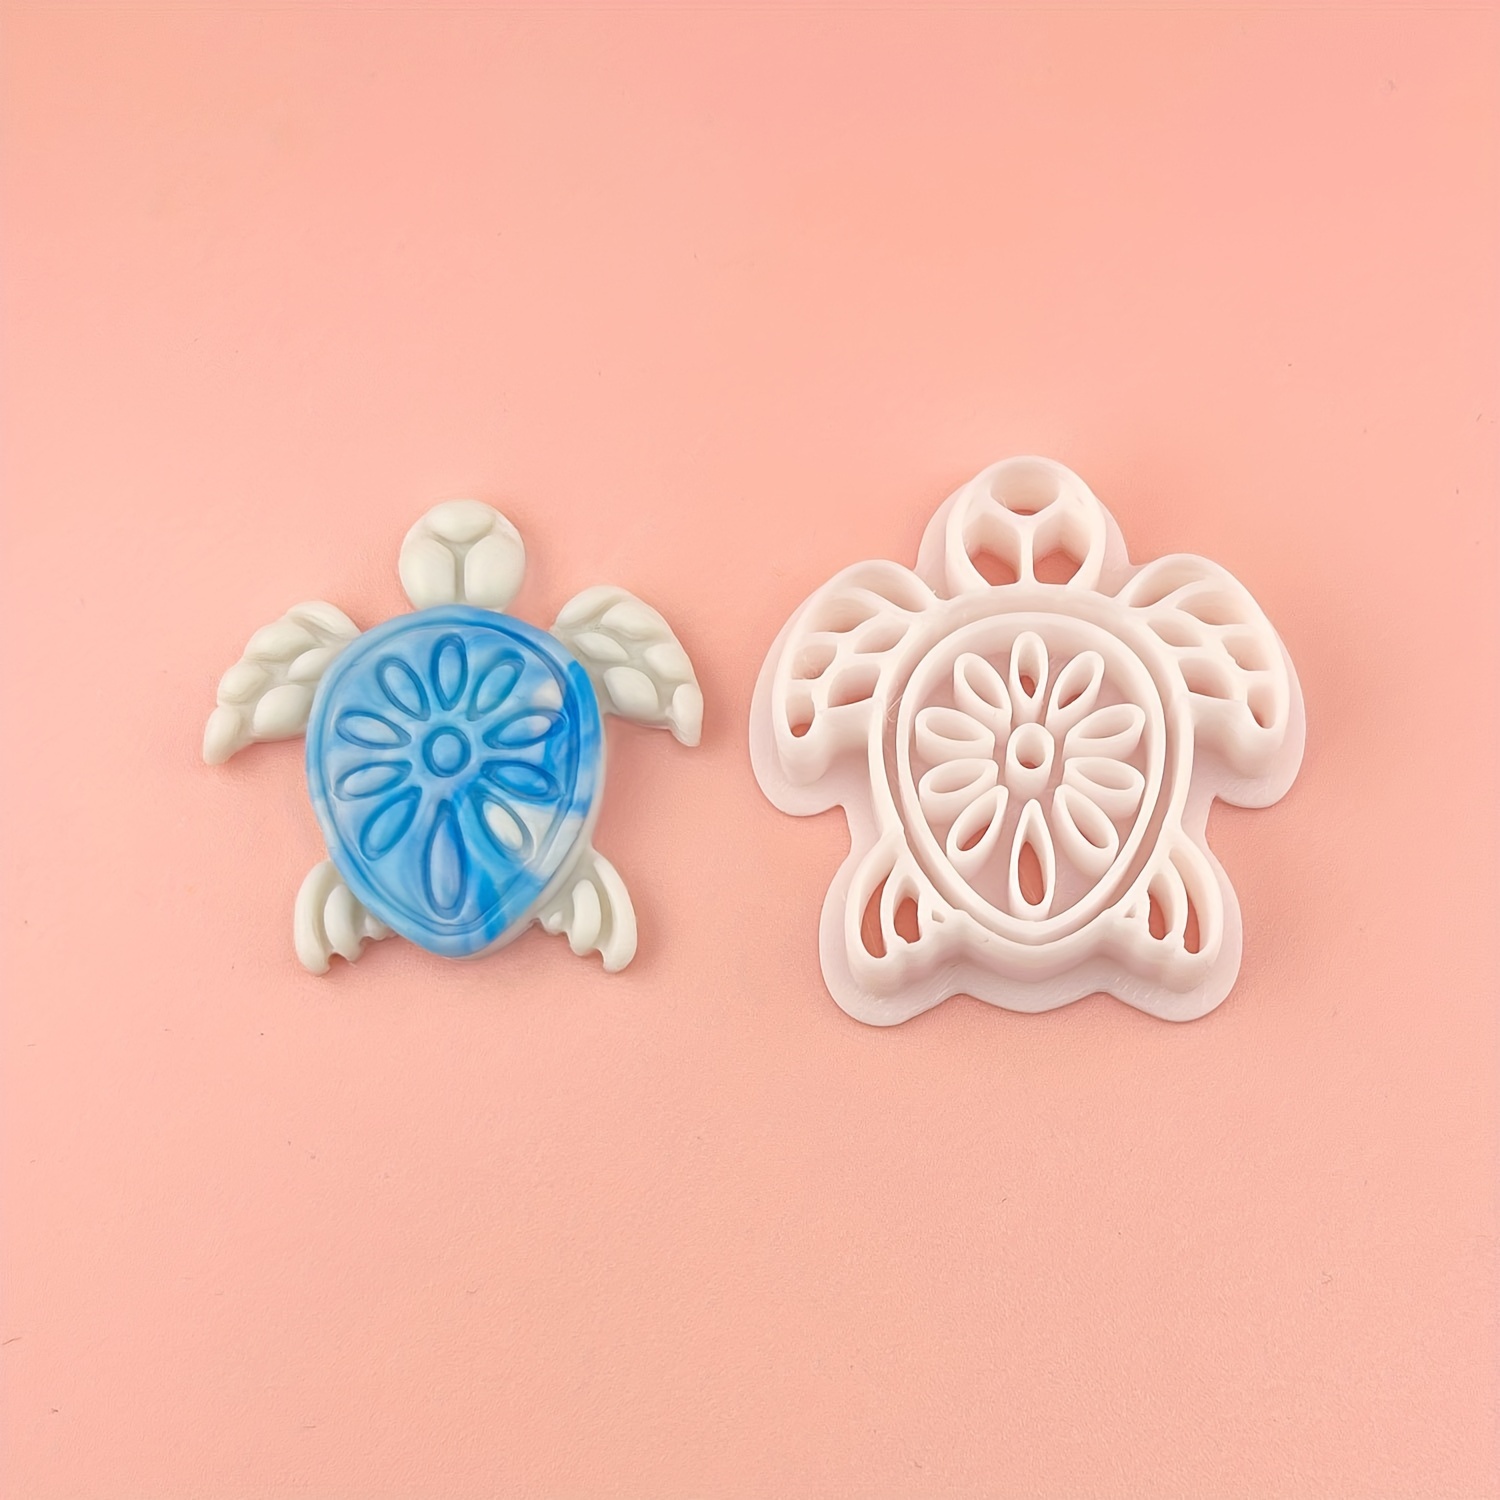 Polymer clay cutter 3D print cutters Jewelry Earrings Coral shape plastic  cutter